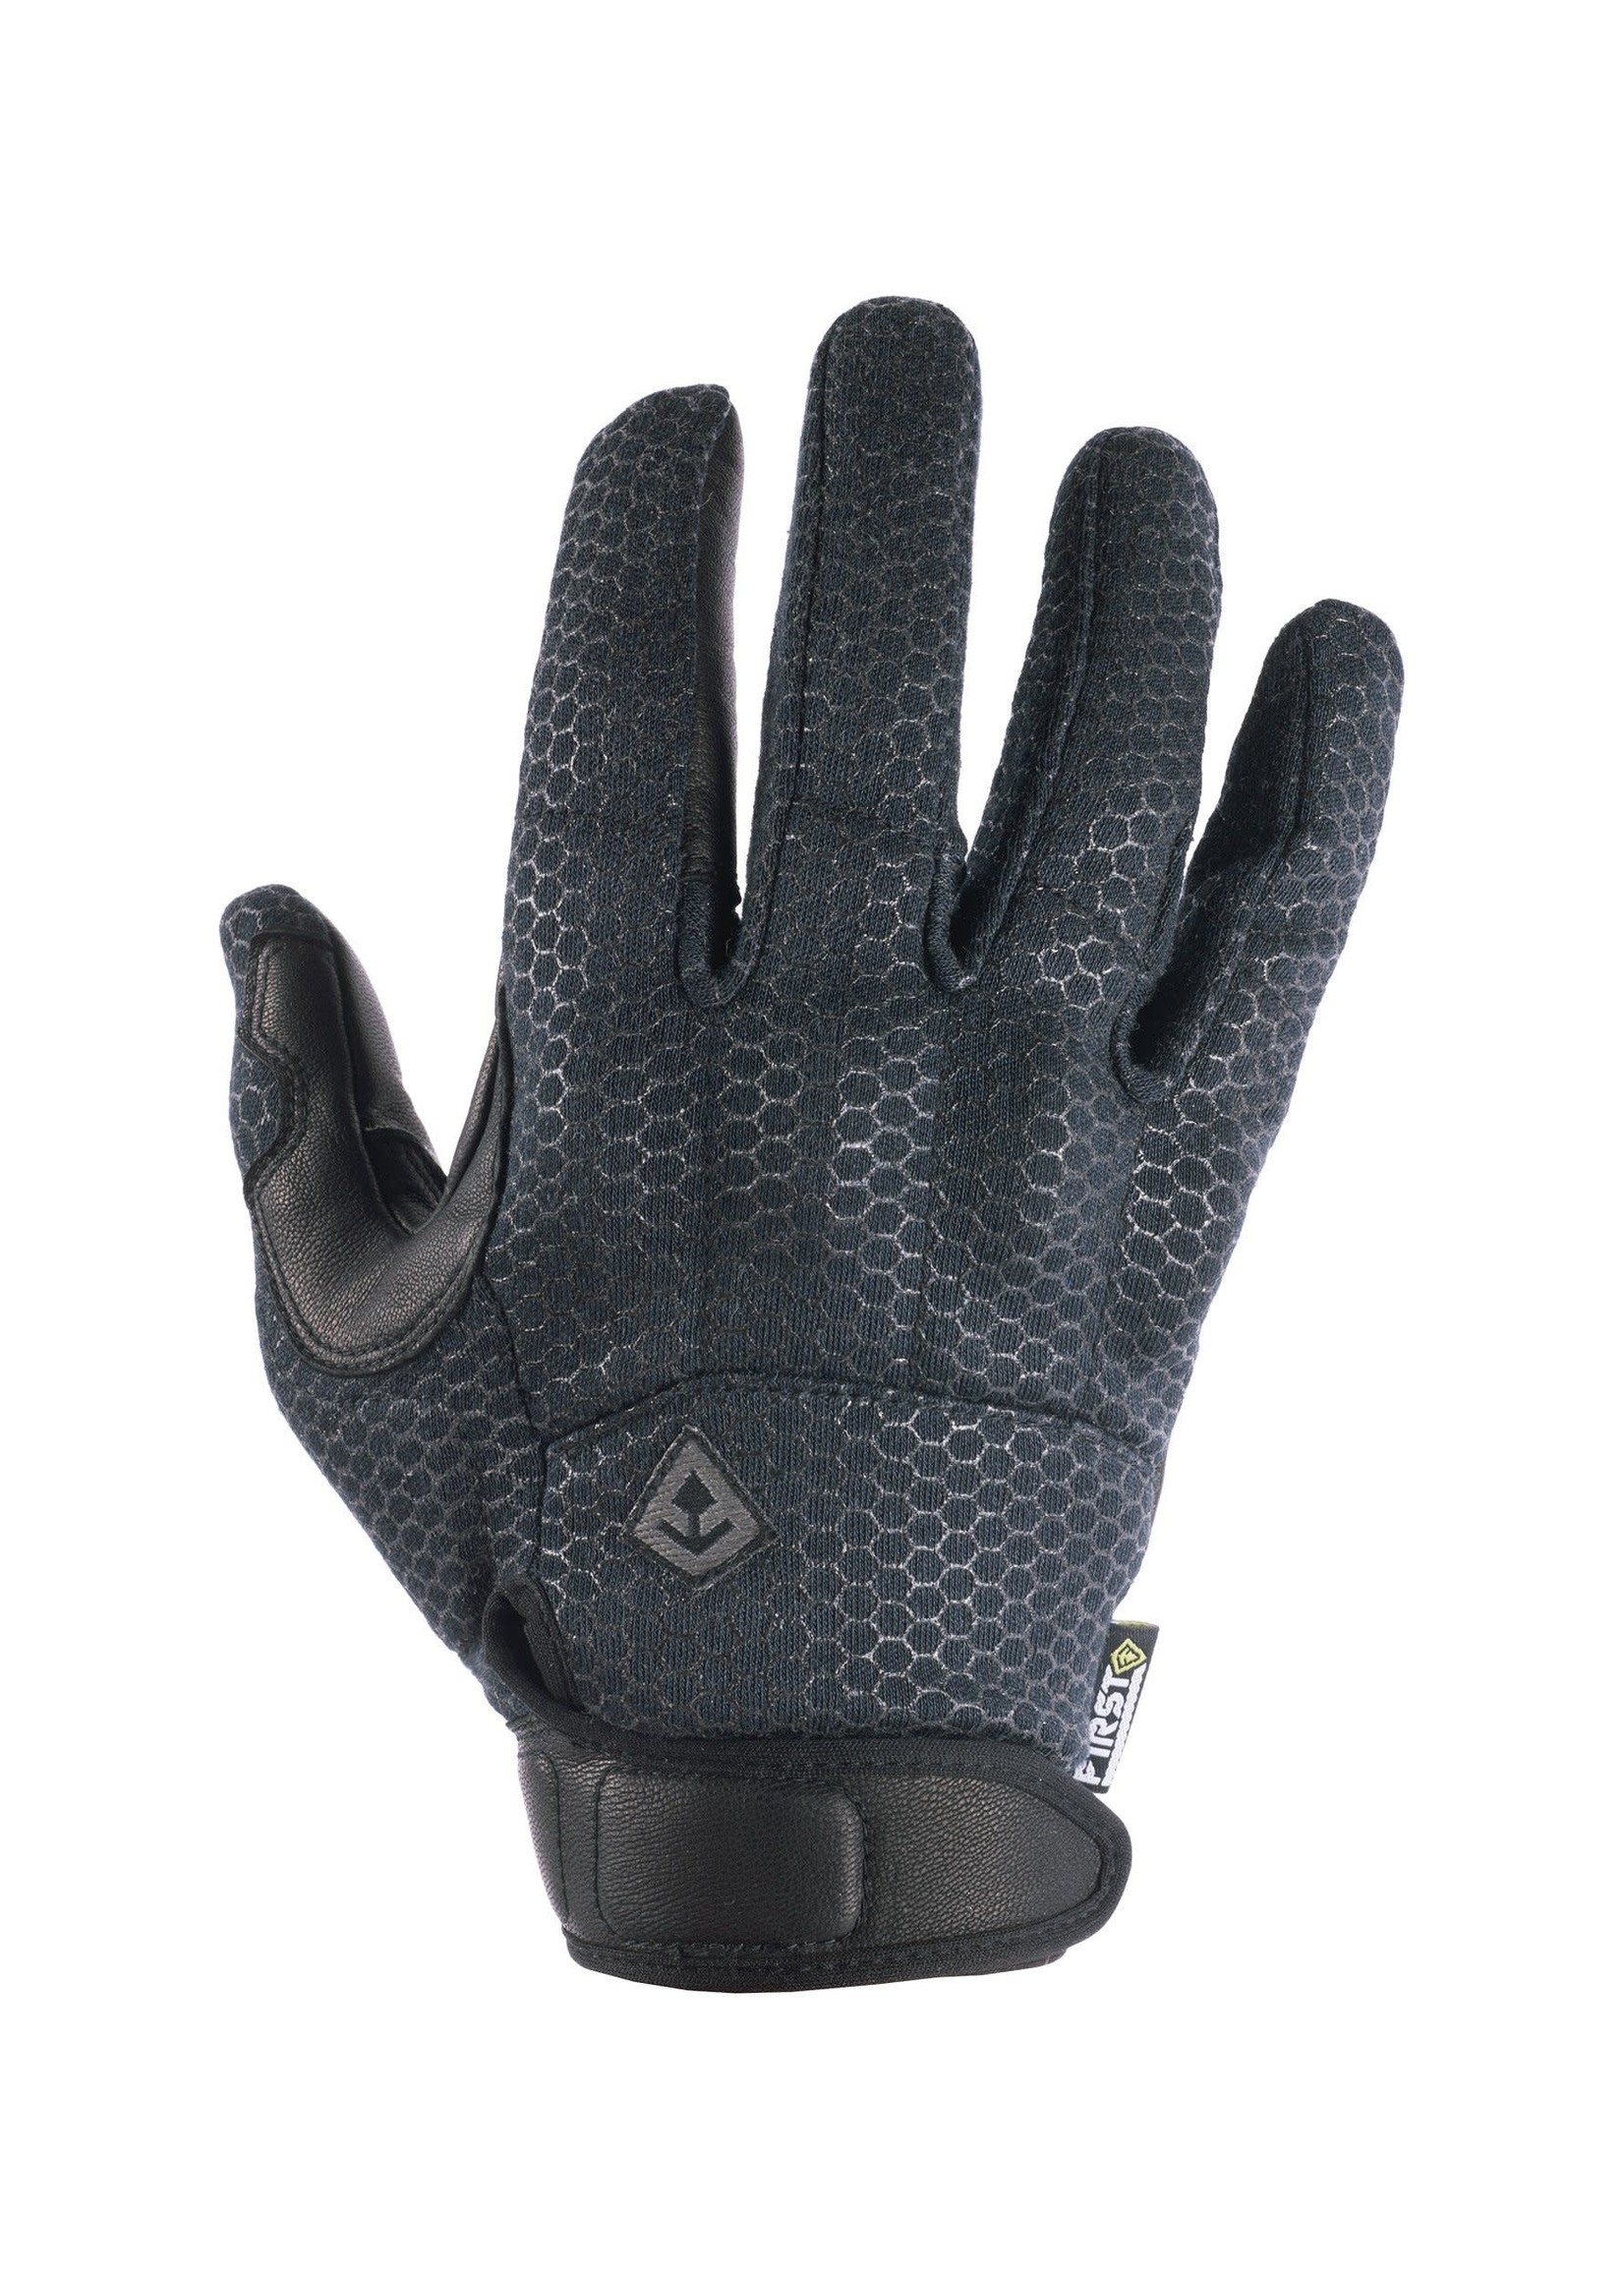 First Tactical First Tactical Slash & Flash Protective Knuckle Glove